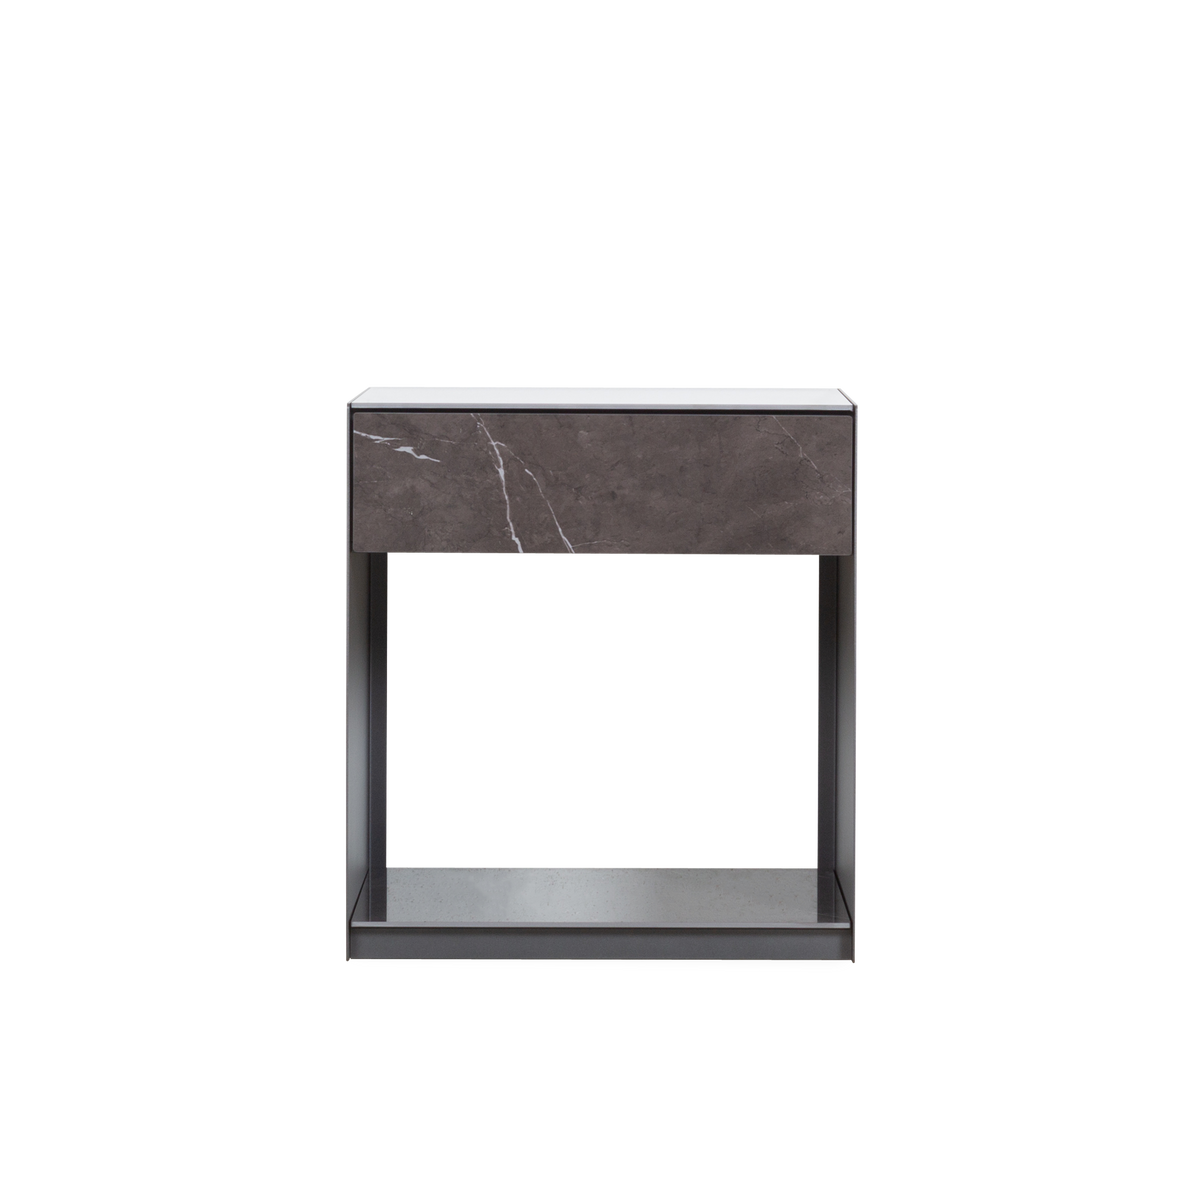 A bright display of architectural lines, the Lane Nightstand offers a modern mix of materials.